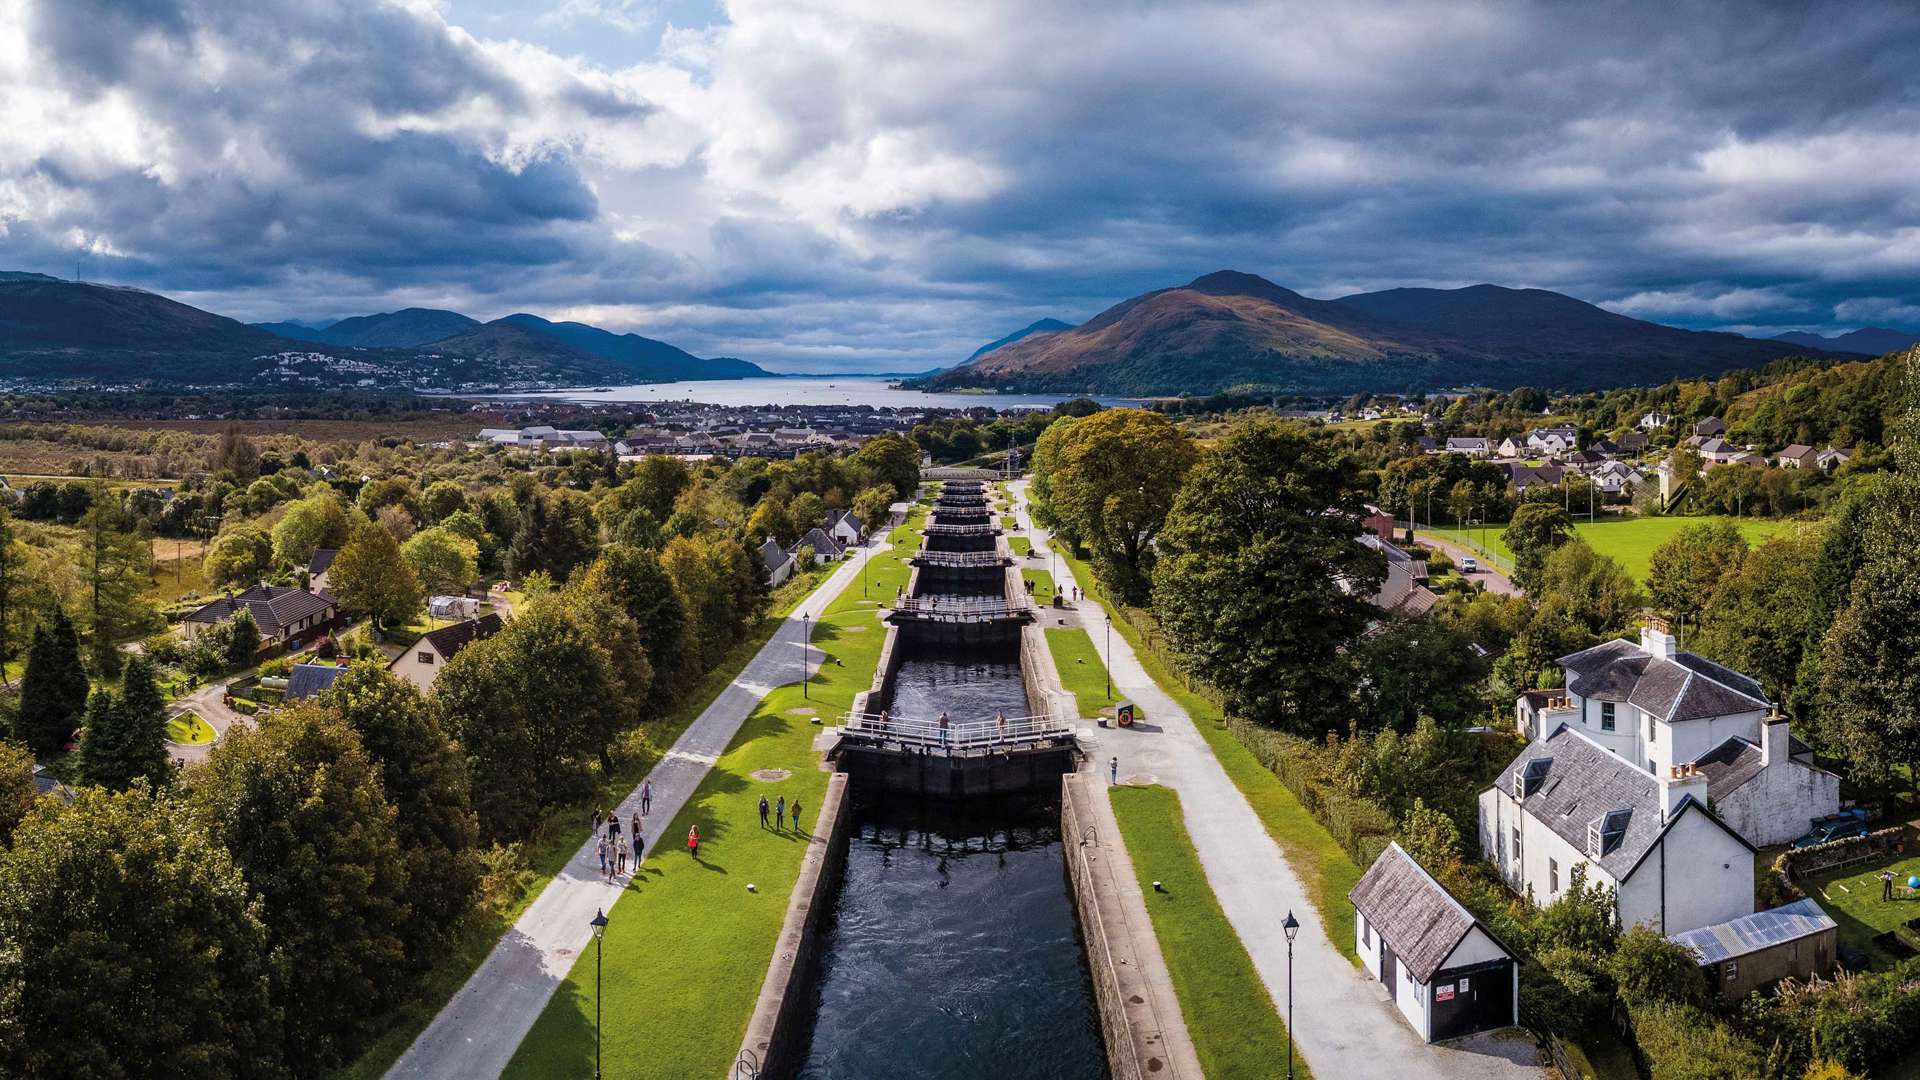 Neptune's Staircase, Caledonian Canal, Scotland